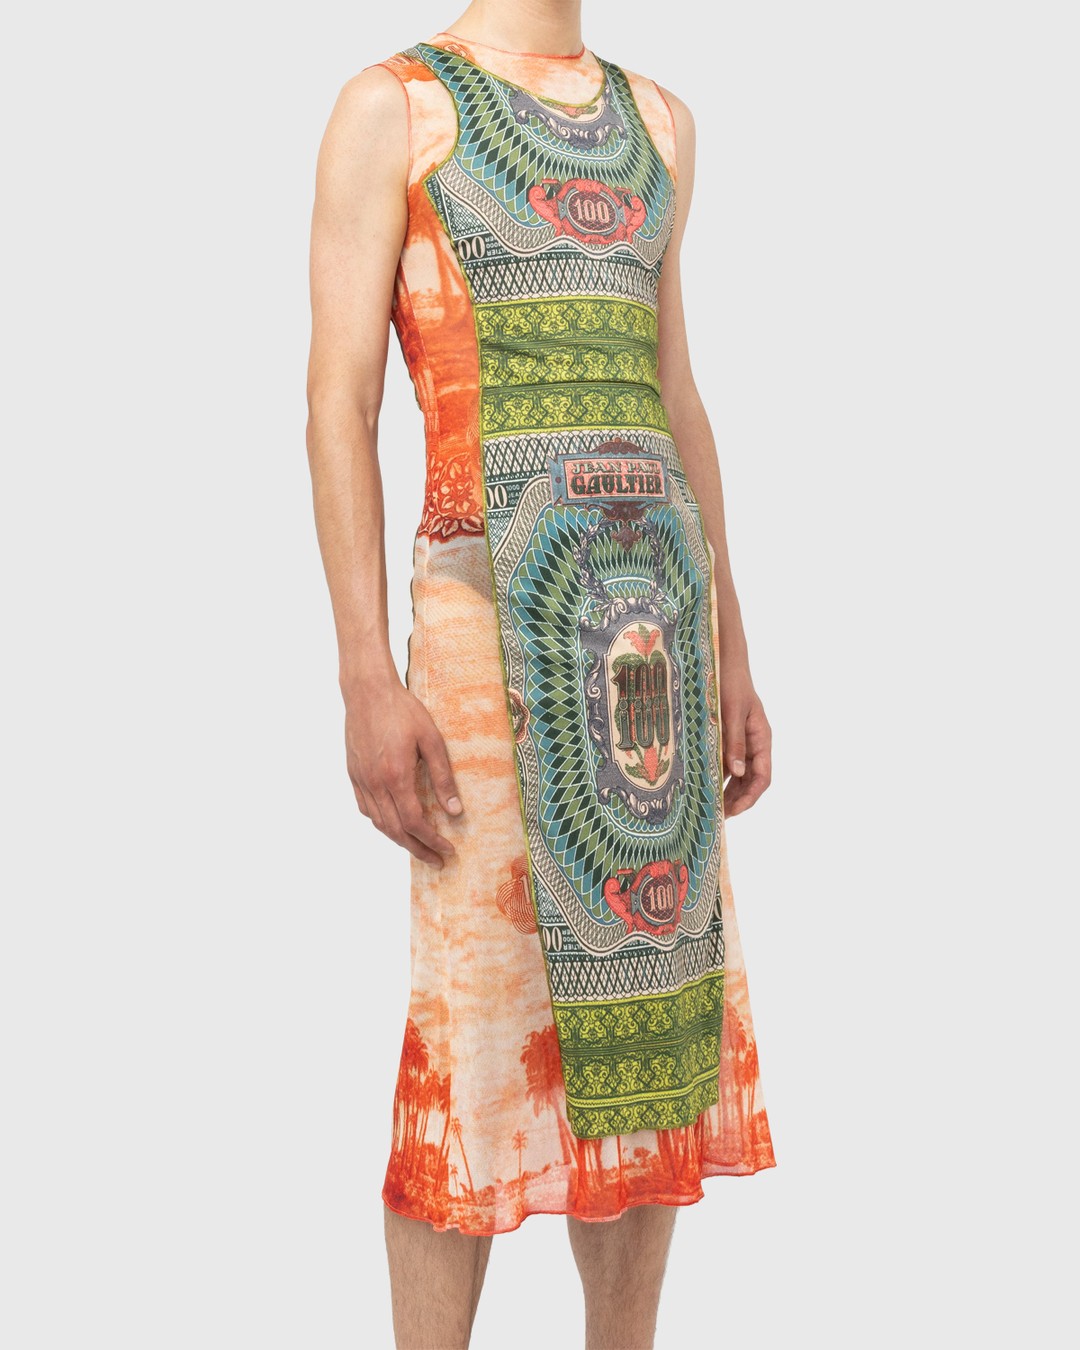 Jean Paul Gaultier – Banknote and Palm Tree Print Dress Multi - Dresses & Skirts - Green - Image 5